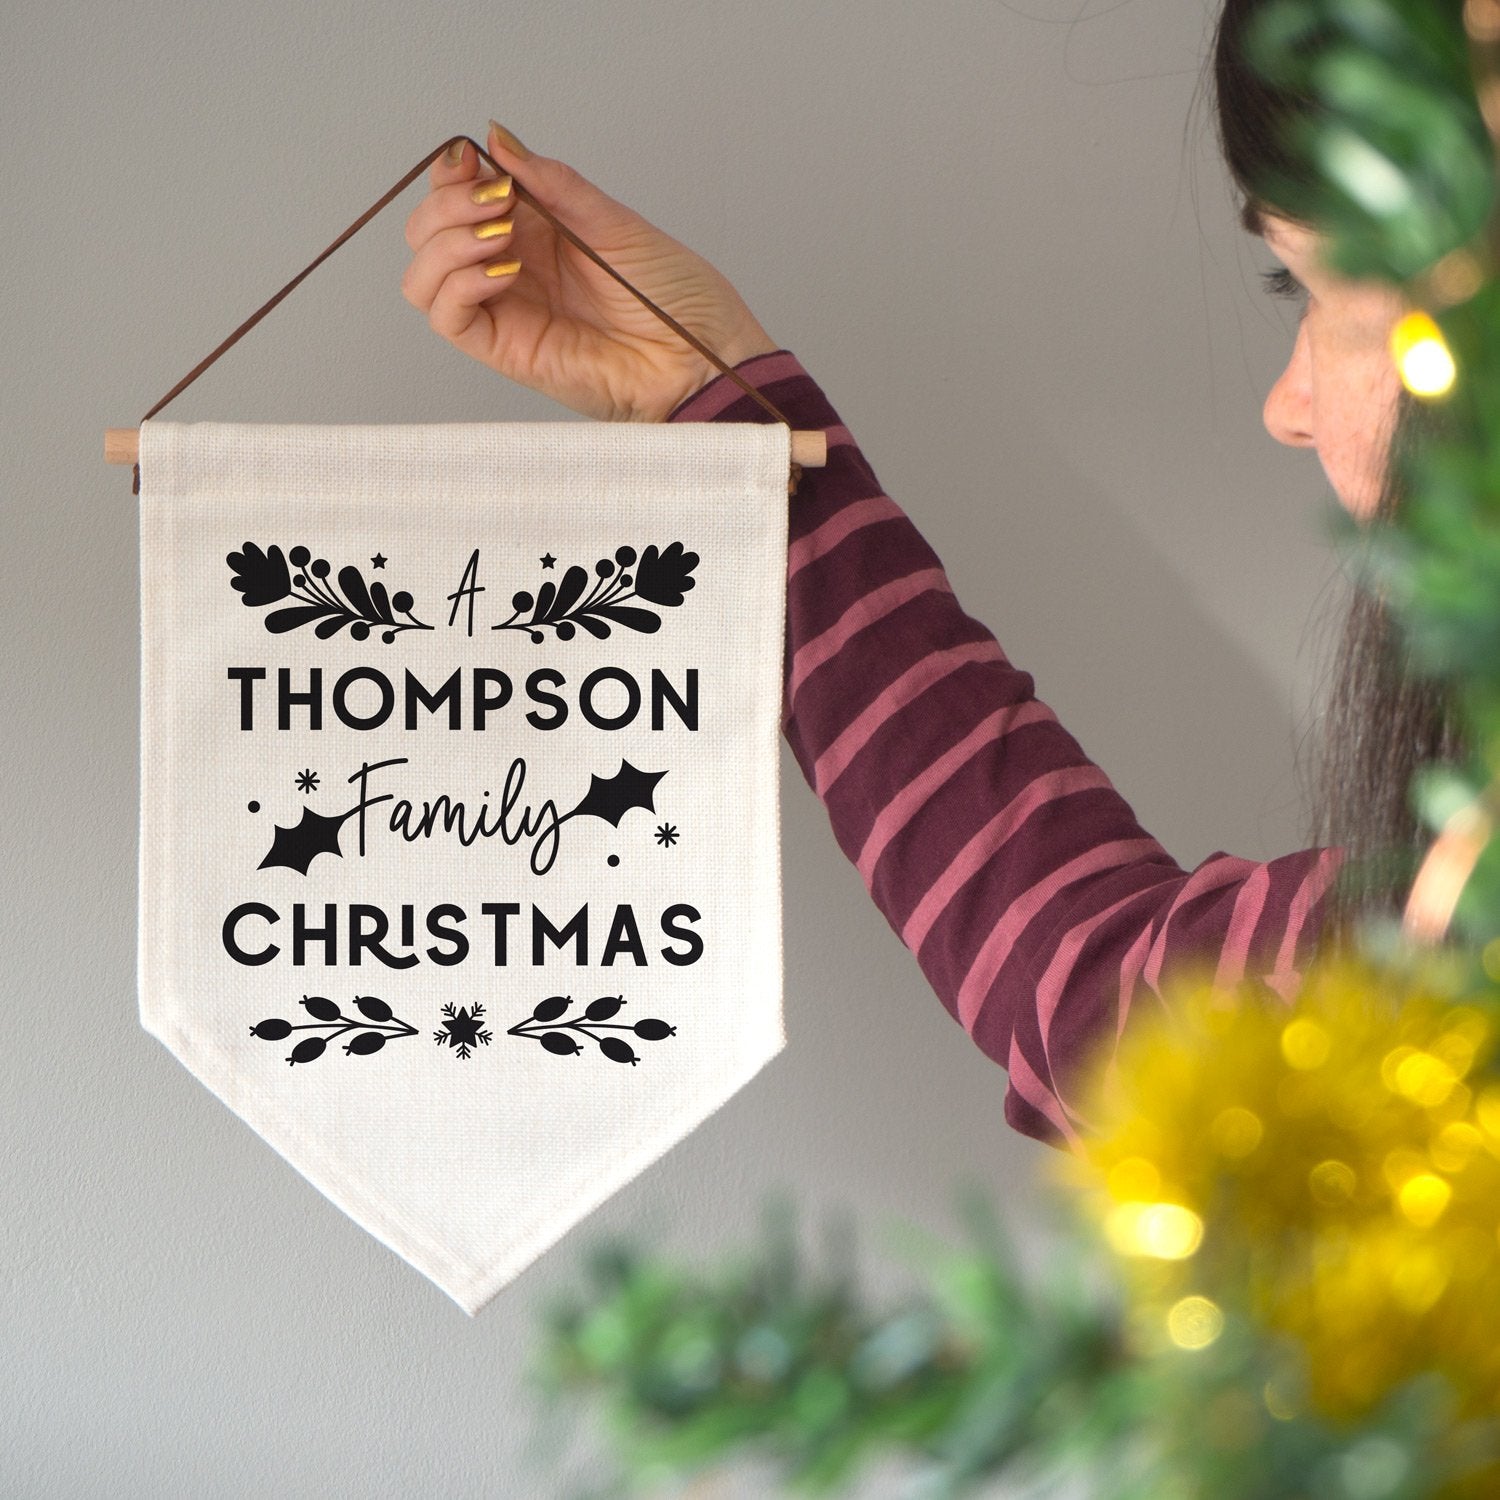 A personalised family Christmas banner flag personalised with your family name and adorned with festive flourishes! Each flag has a black print on natural coloured linen.